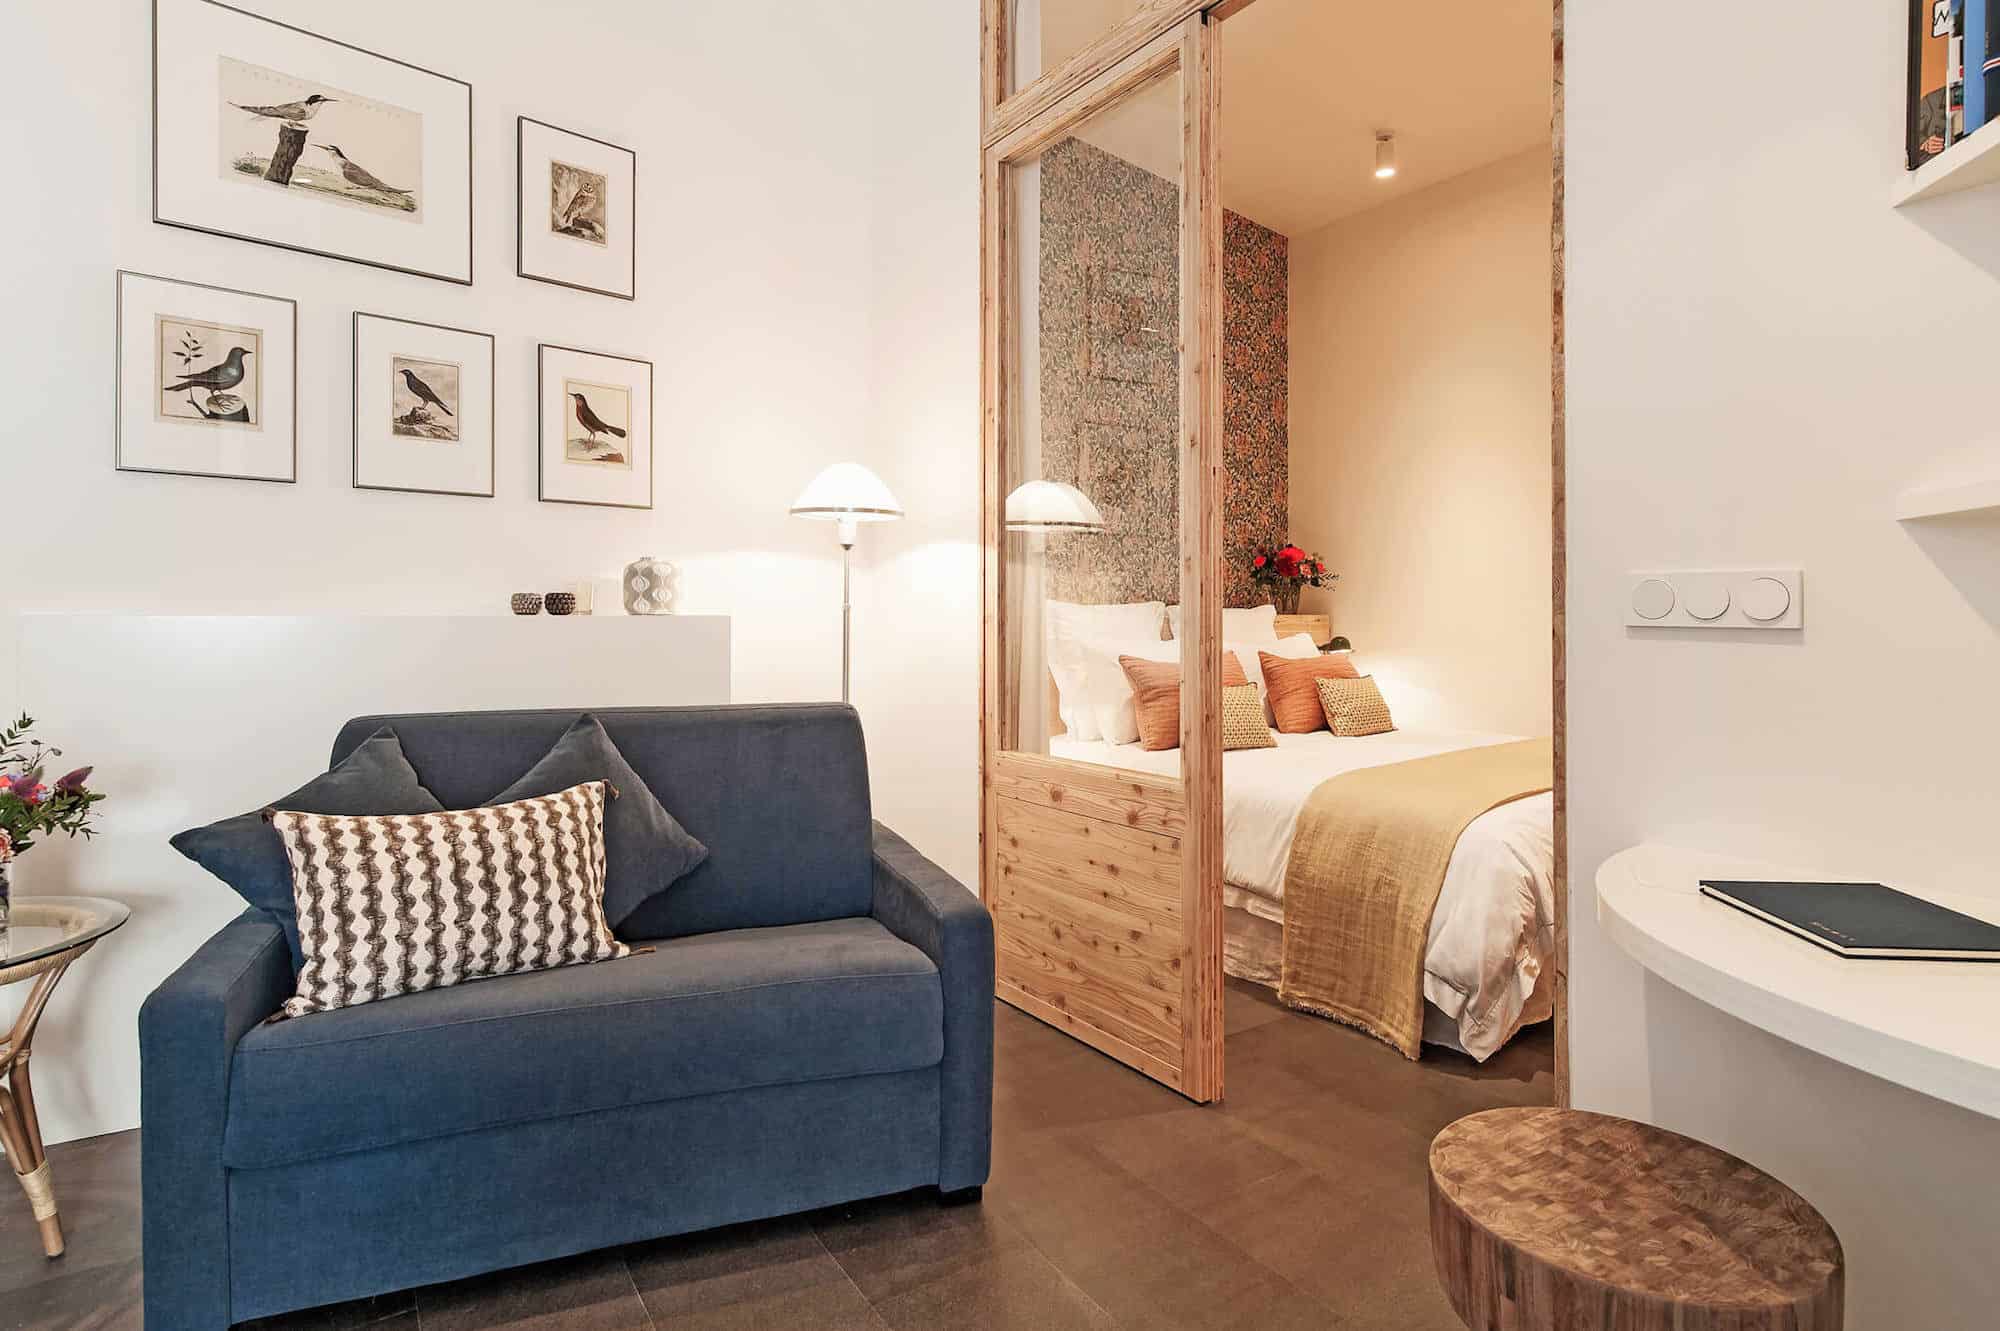 A beautiful rental apartment in Paris' Hotel de Ville area with a blue armchair, bird pictures up on the walls and a cozy double bed in the bedroom.